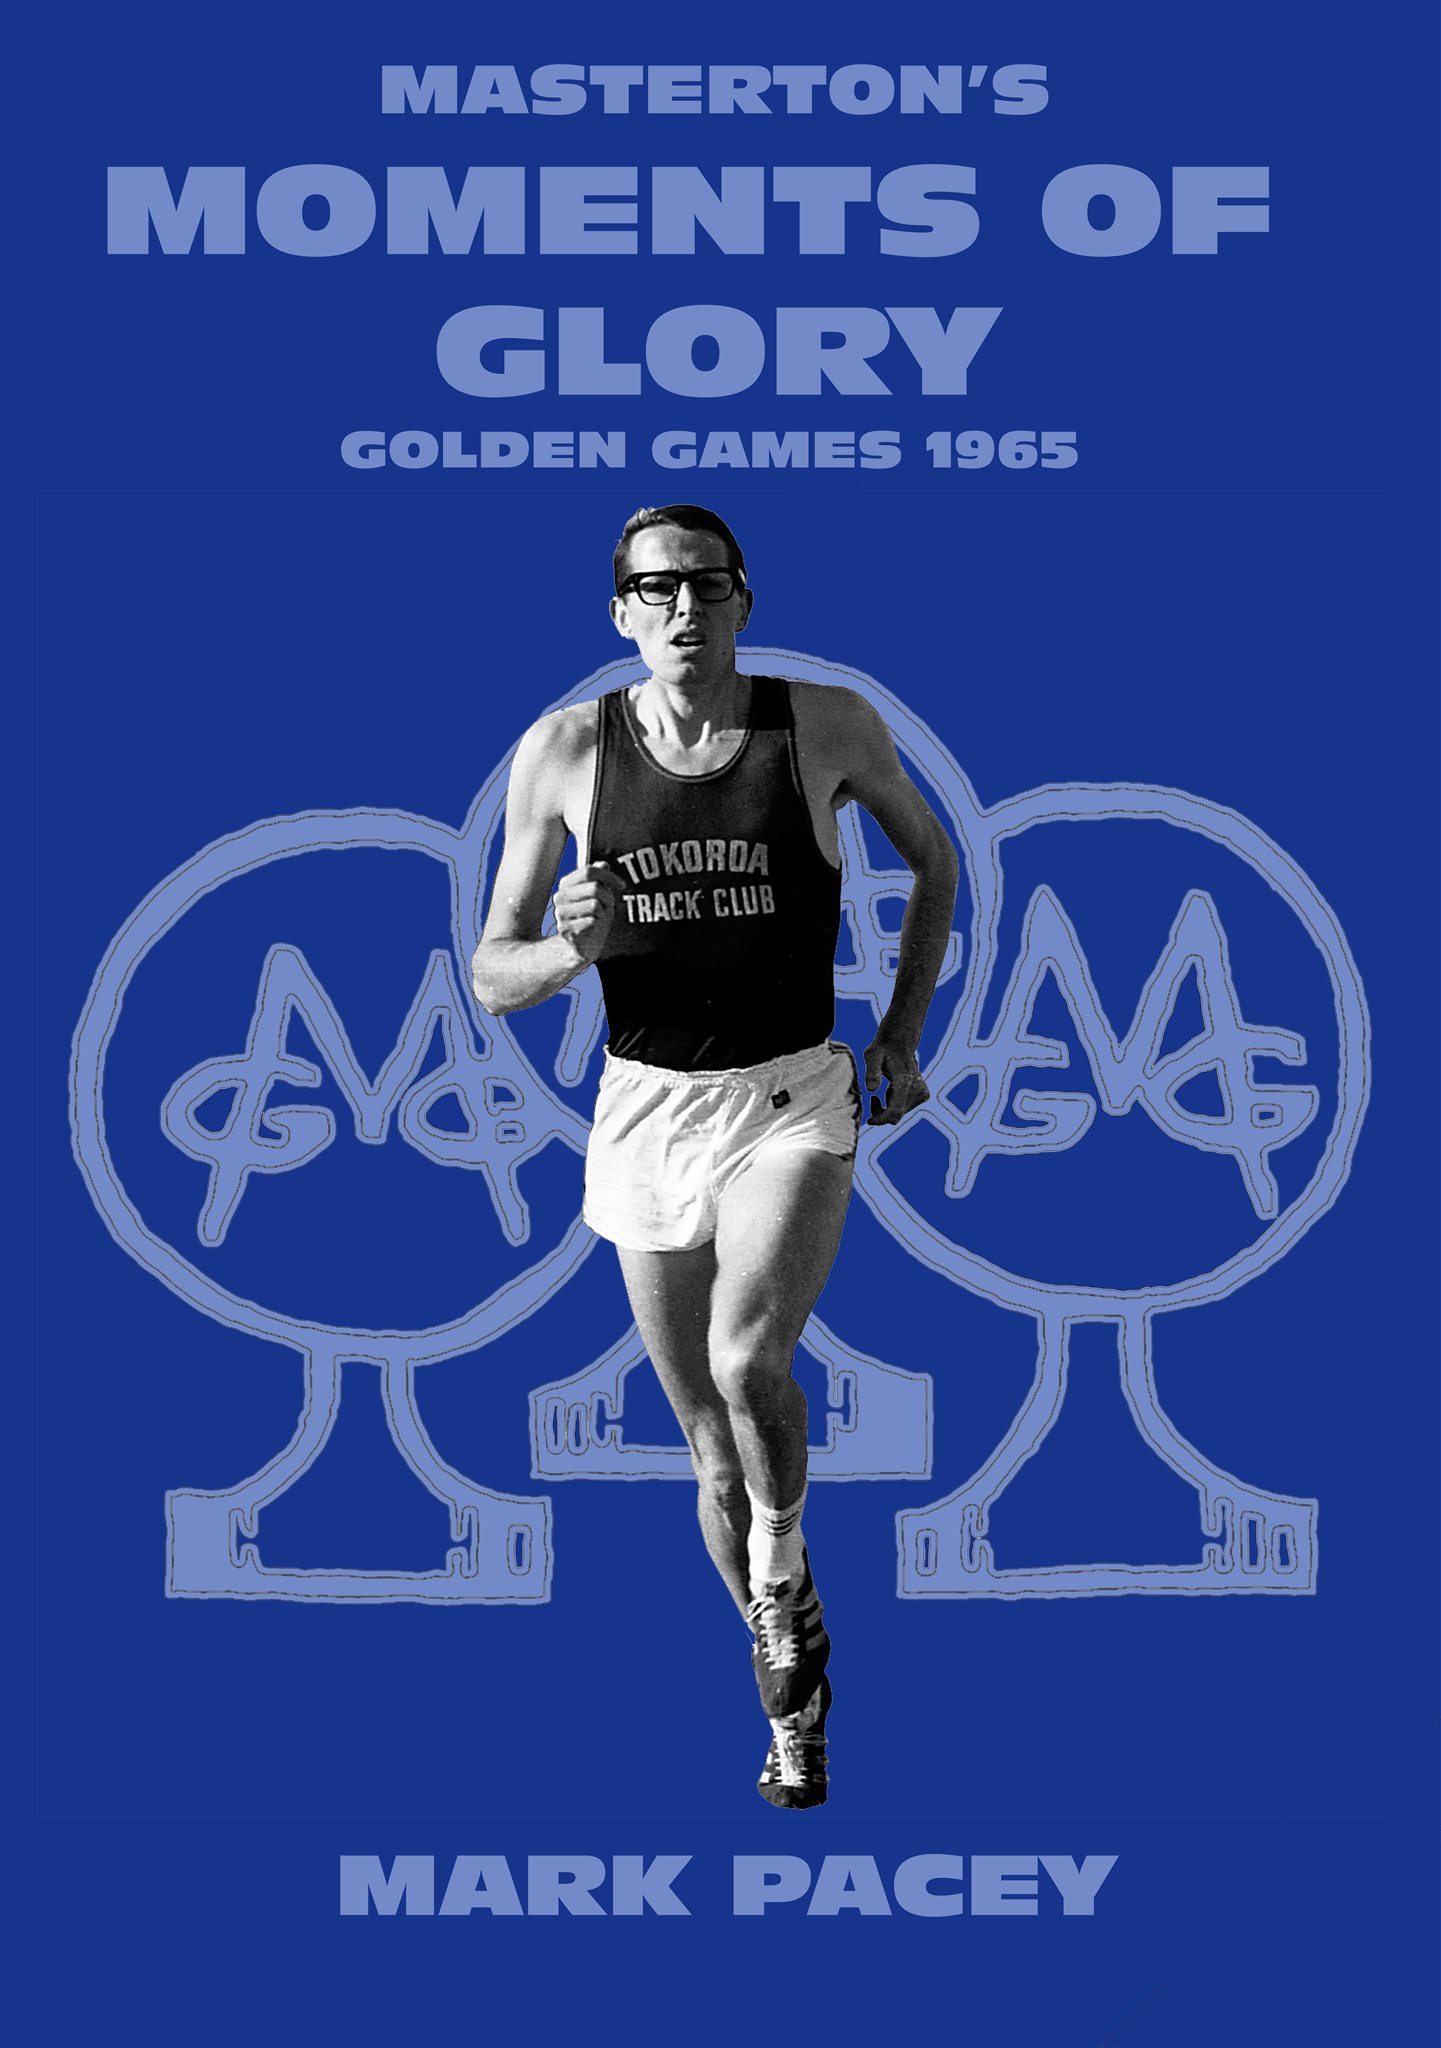 Masterton’s Moments of Glory: Golden Games 1965